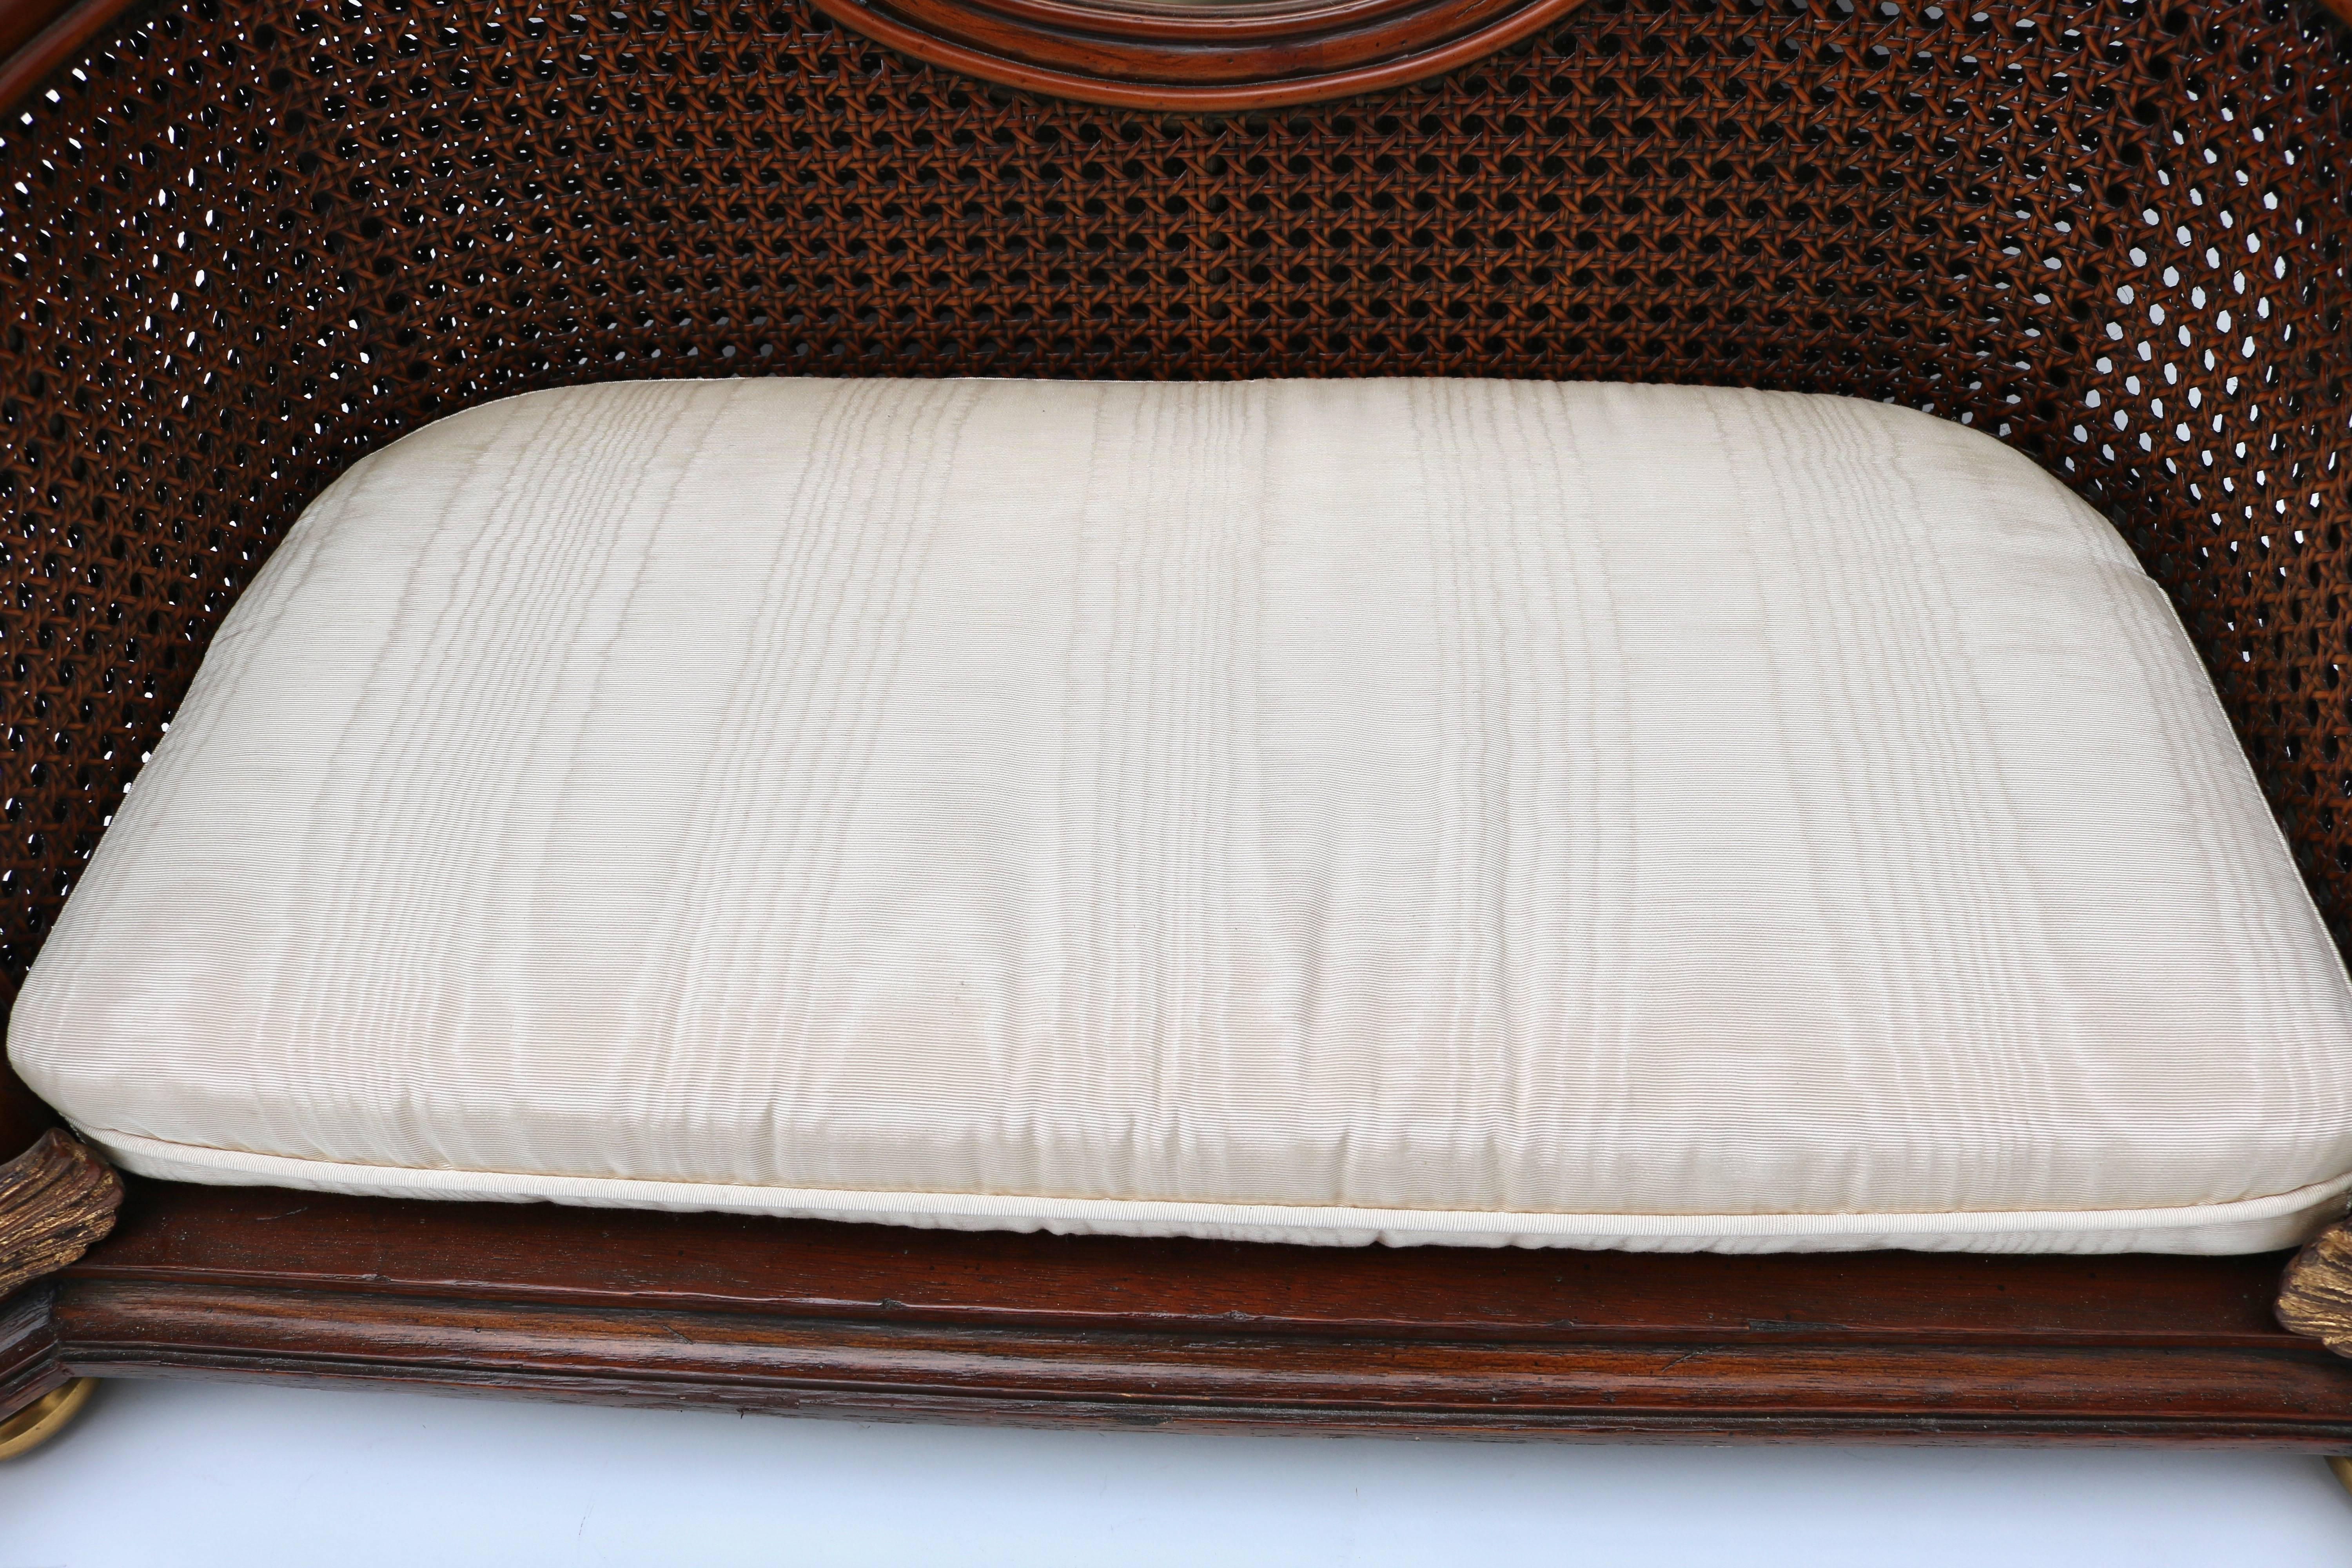 This stylish pet bed was created by the iconic firm of Maitland Smith and is in English Regency style with its mahogany wood frame, French caning and gold finished dolphins. The moire pattern fabric is in a tan coloration and works beautifully with